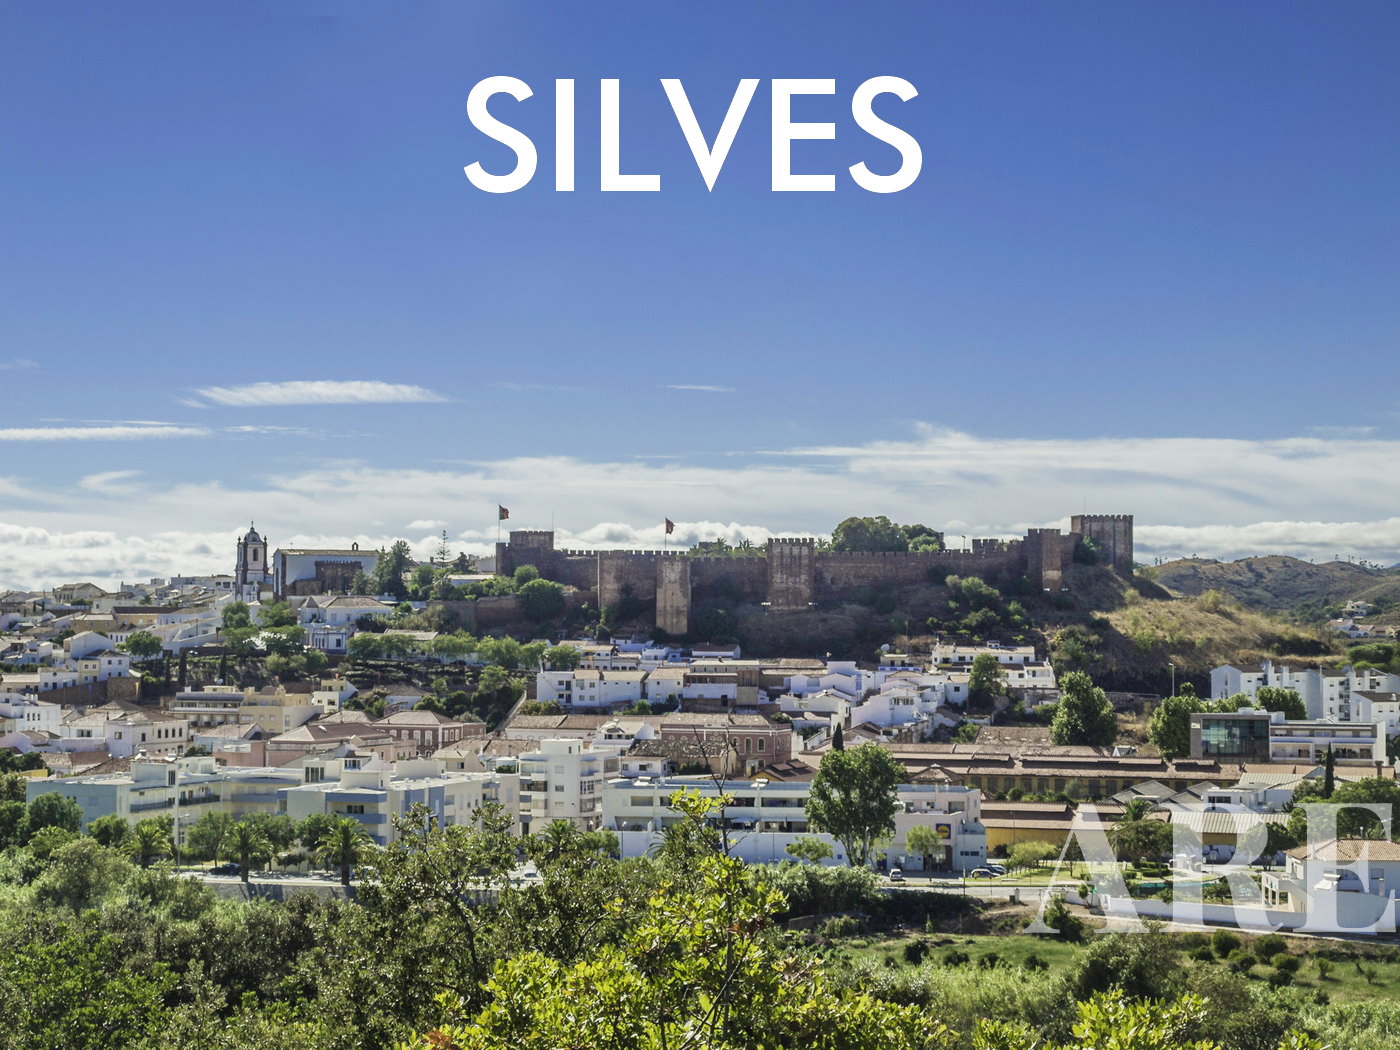 Silves City and Its Imposing Castle